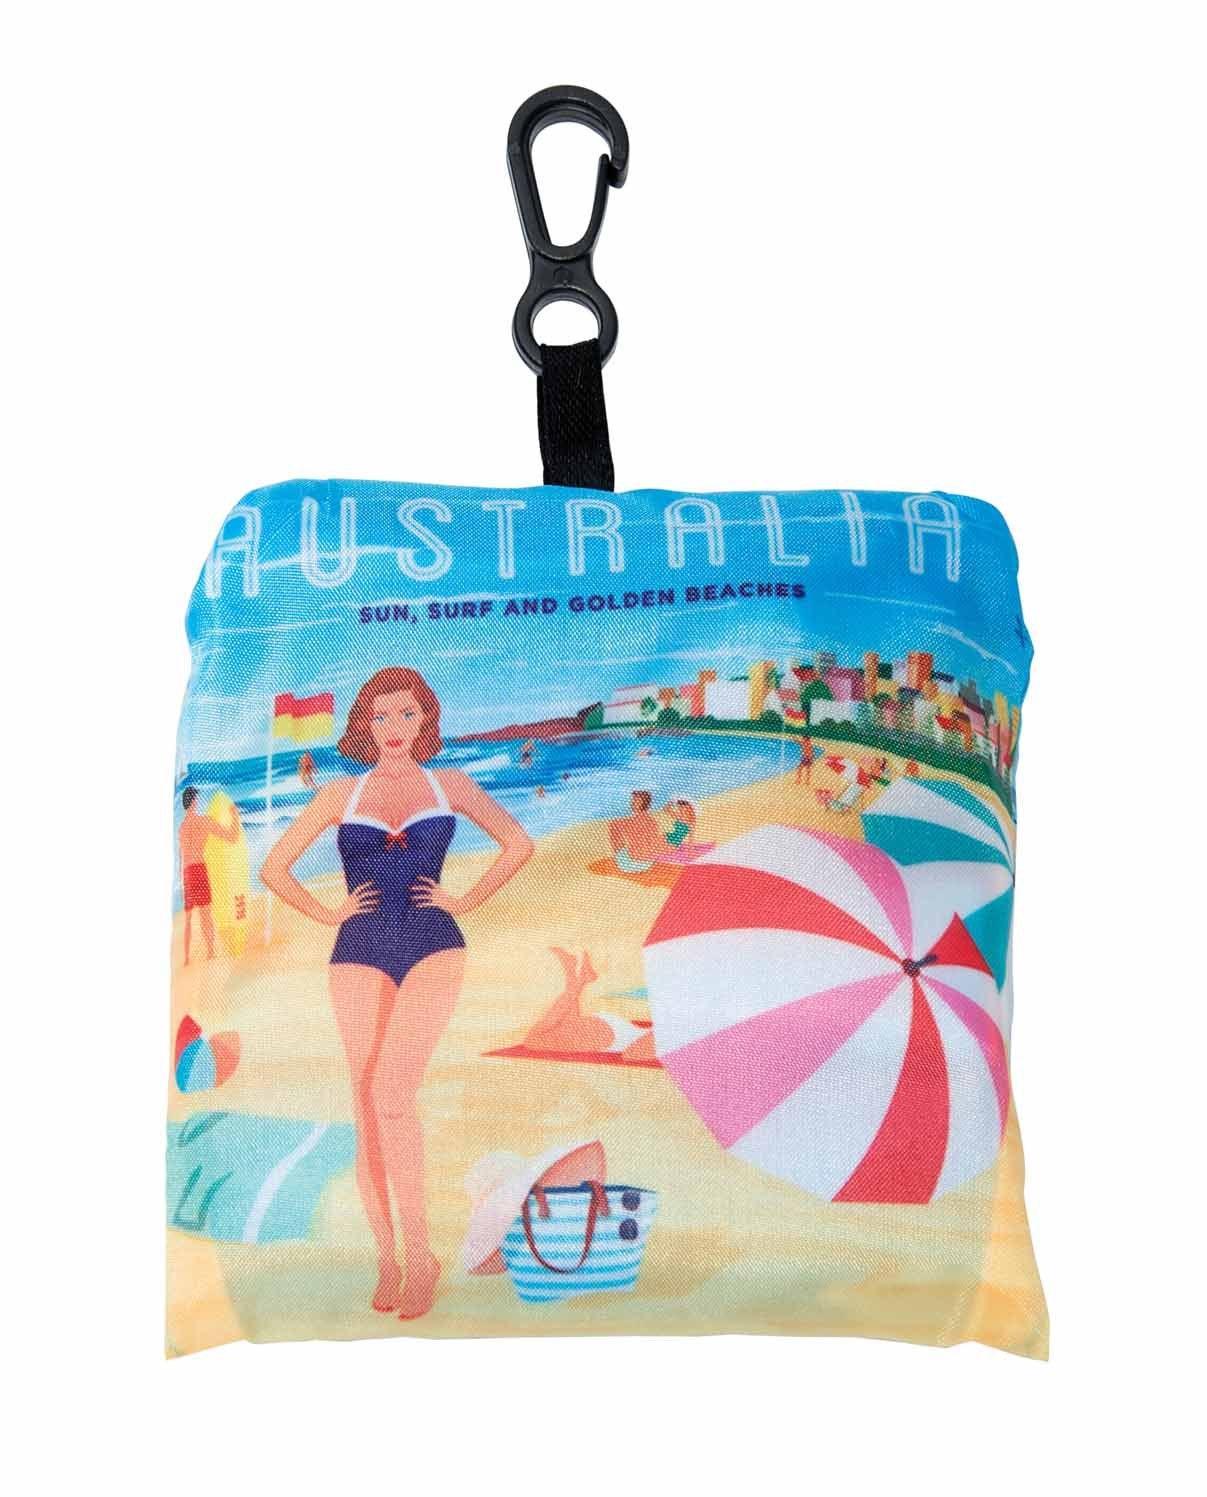 Laundry Bag - Aussie Beach -Holds 3Kg Folds To Compact Pouch & Clip ve